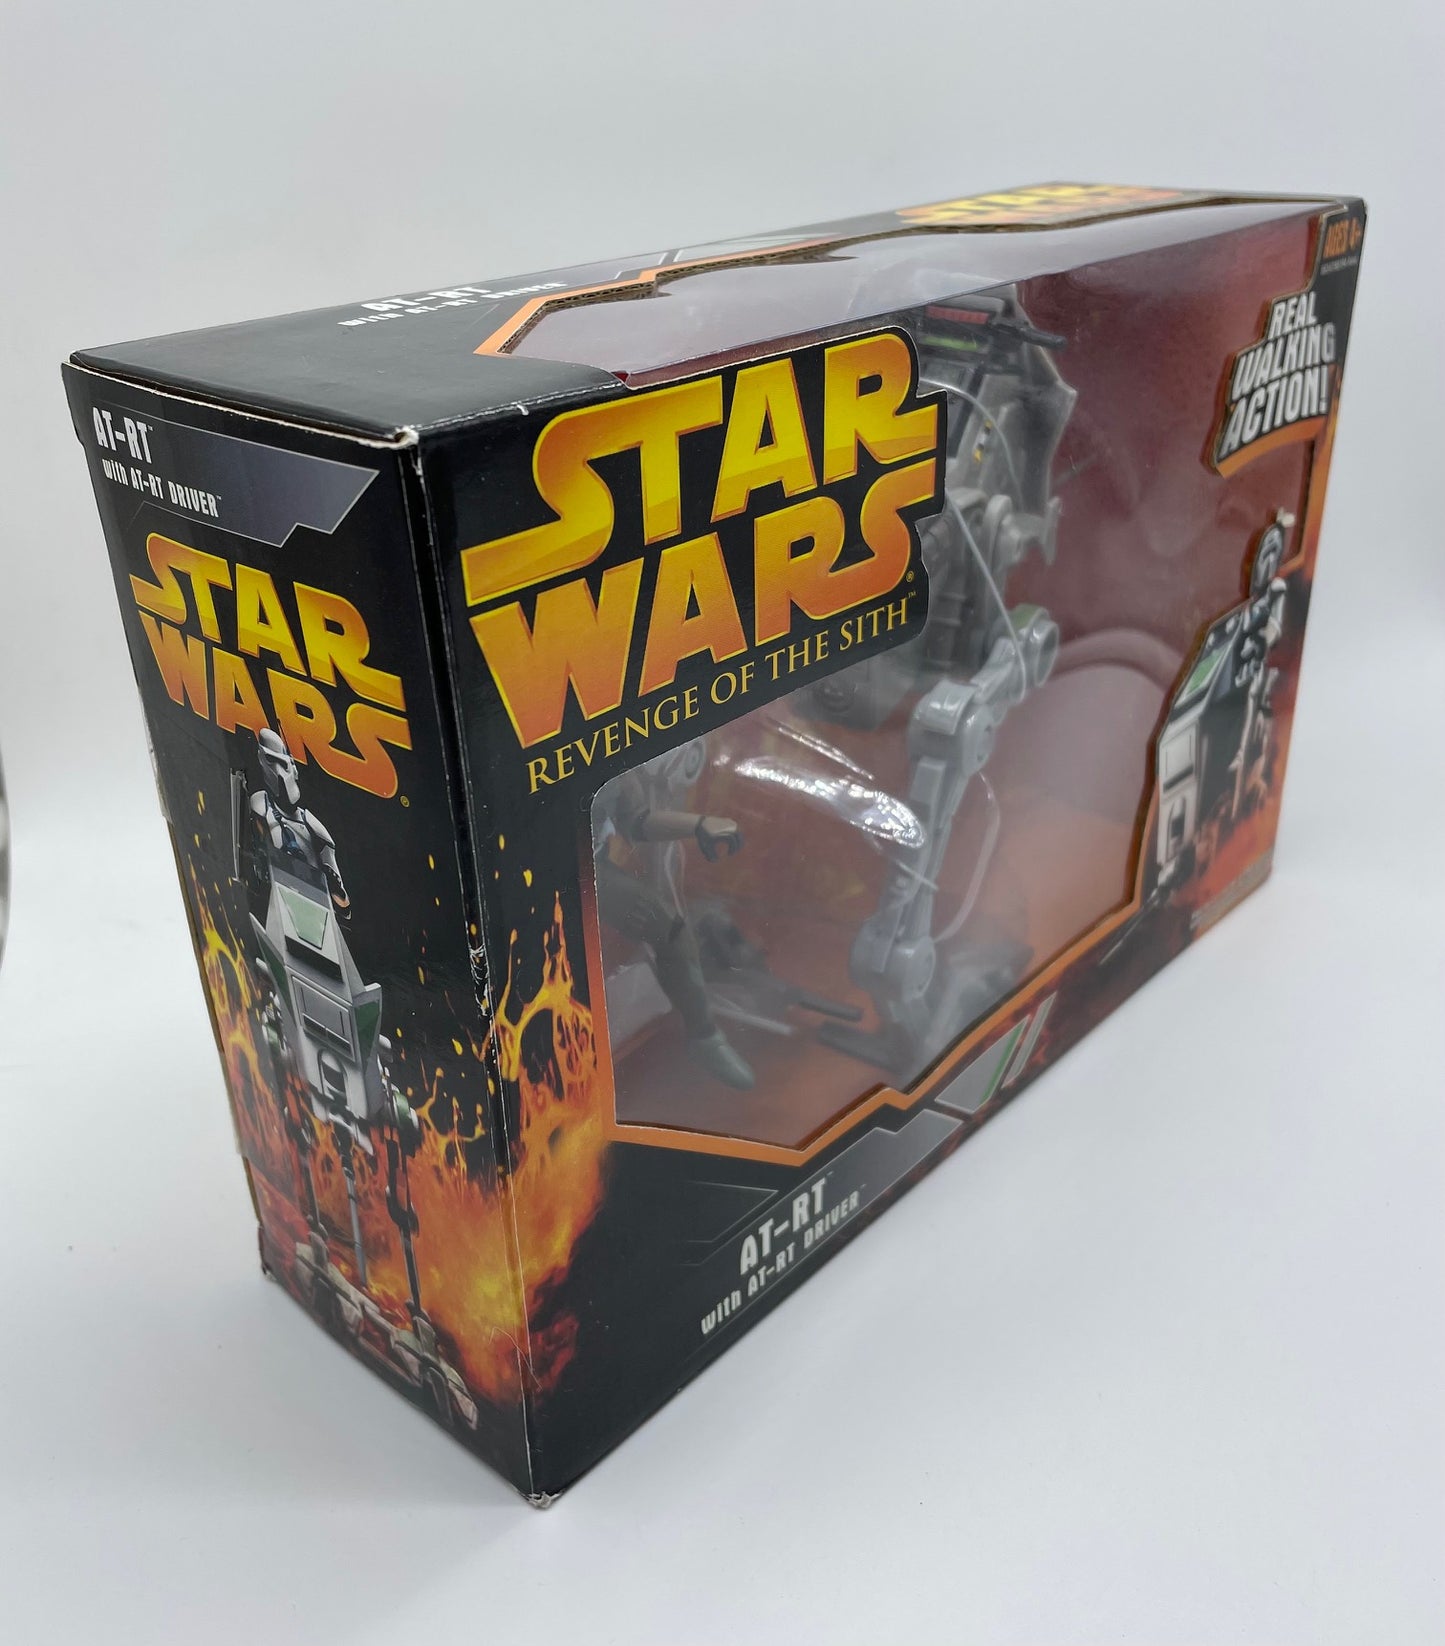 Revenge of the Sith AT-RT and Driver Vehicle Set, Hasbro 2005